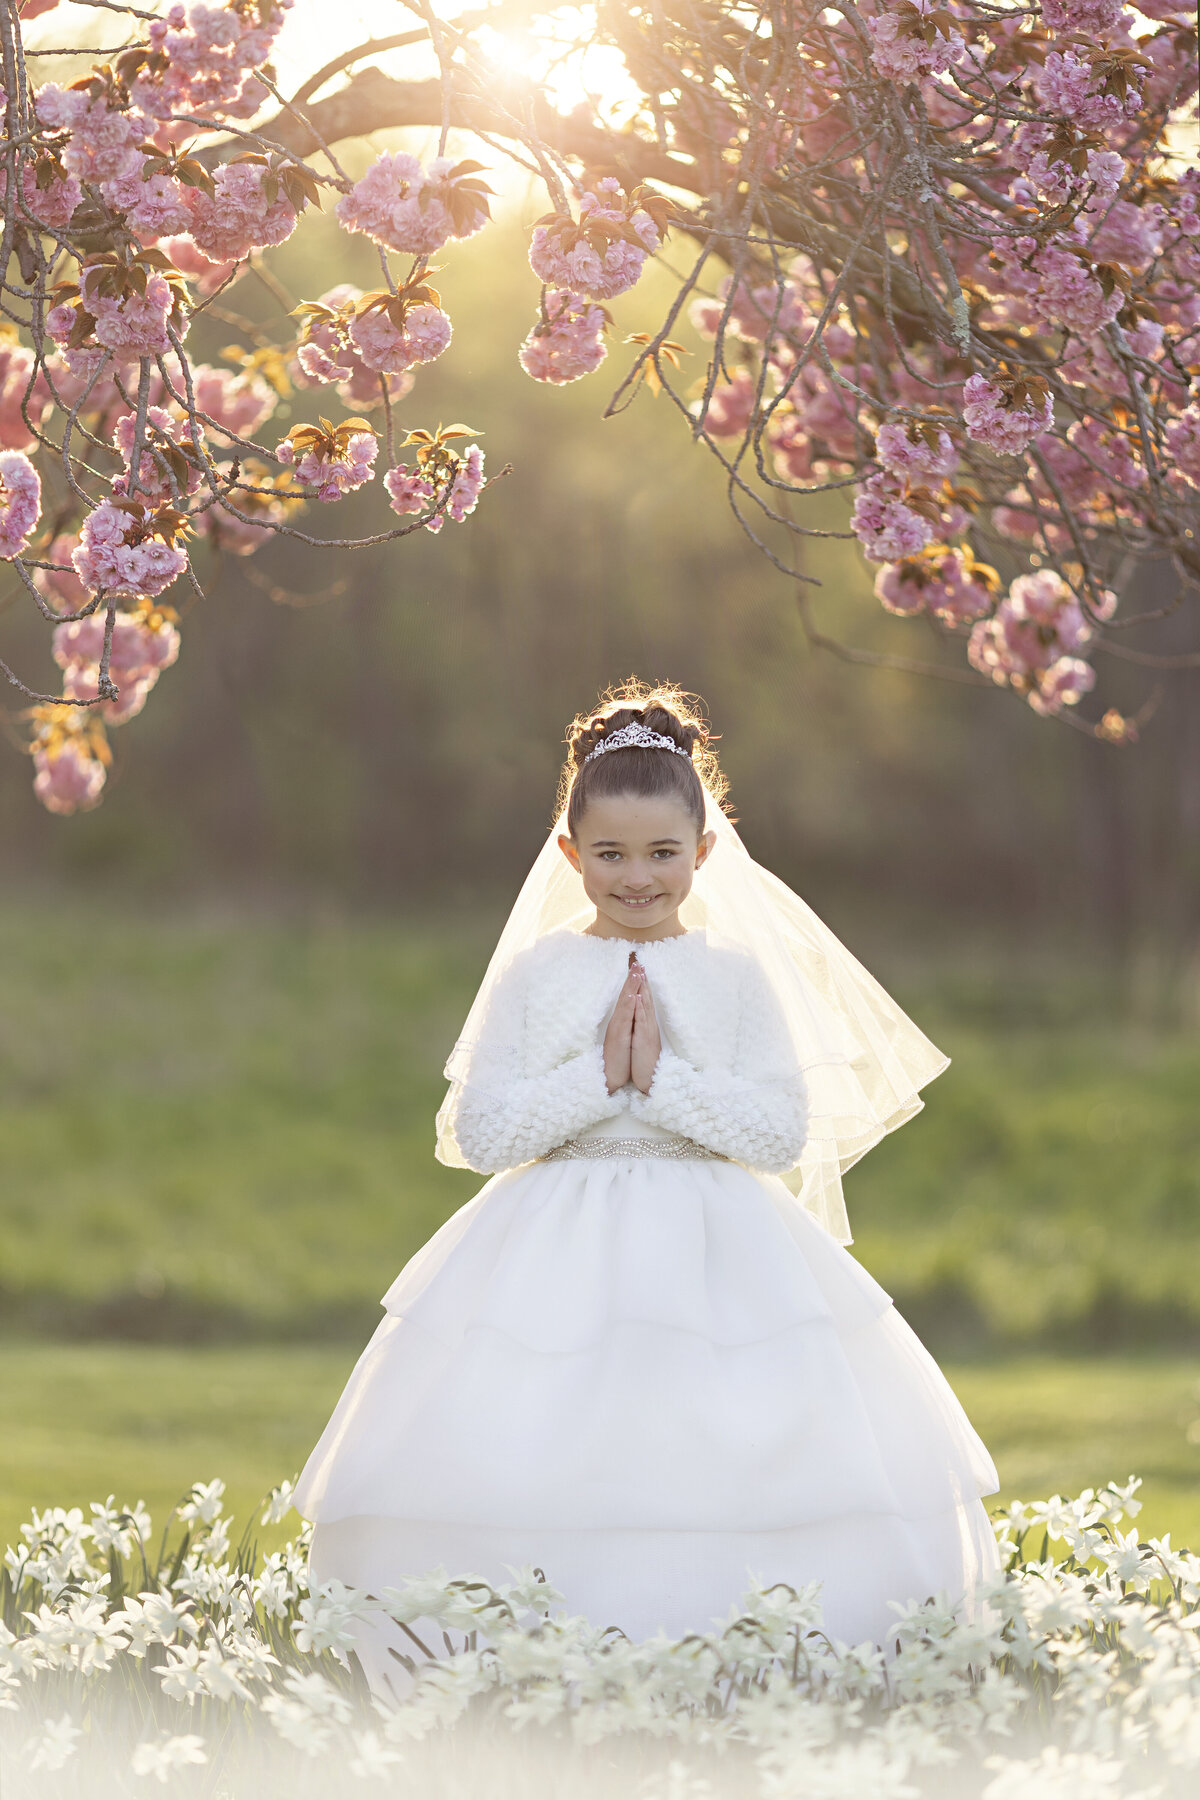 A young girl prays in her communion dress and tiara among white wildflowers